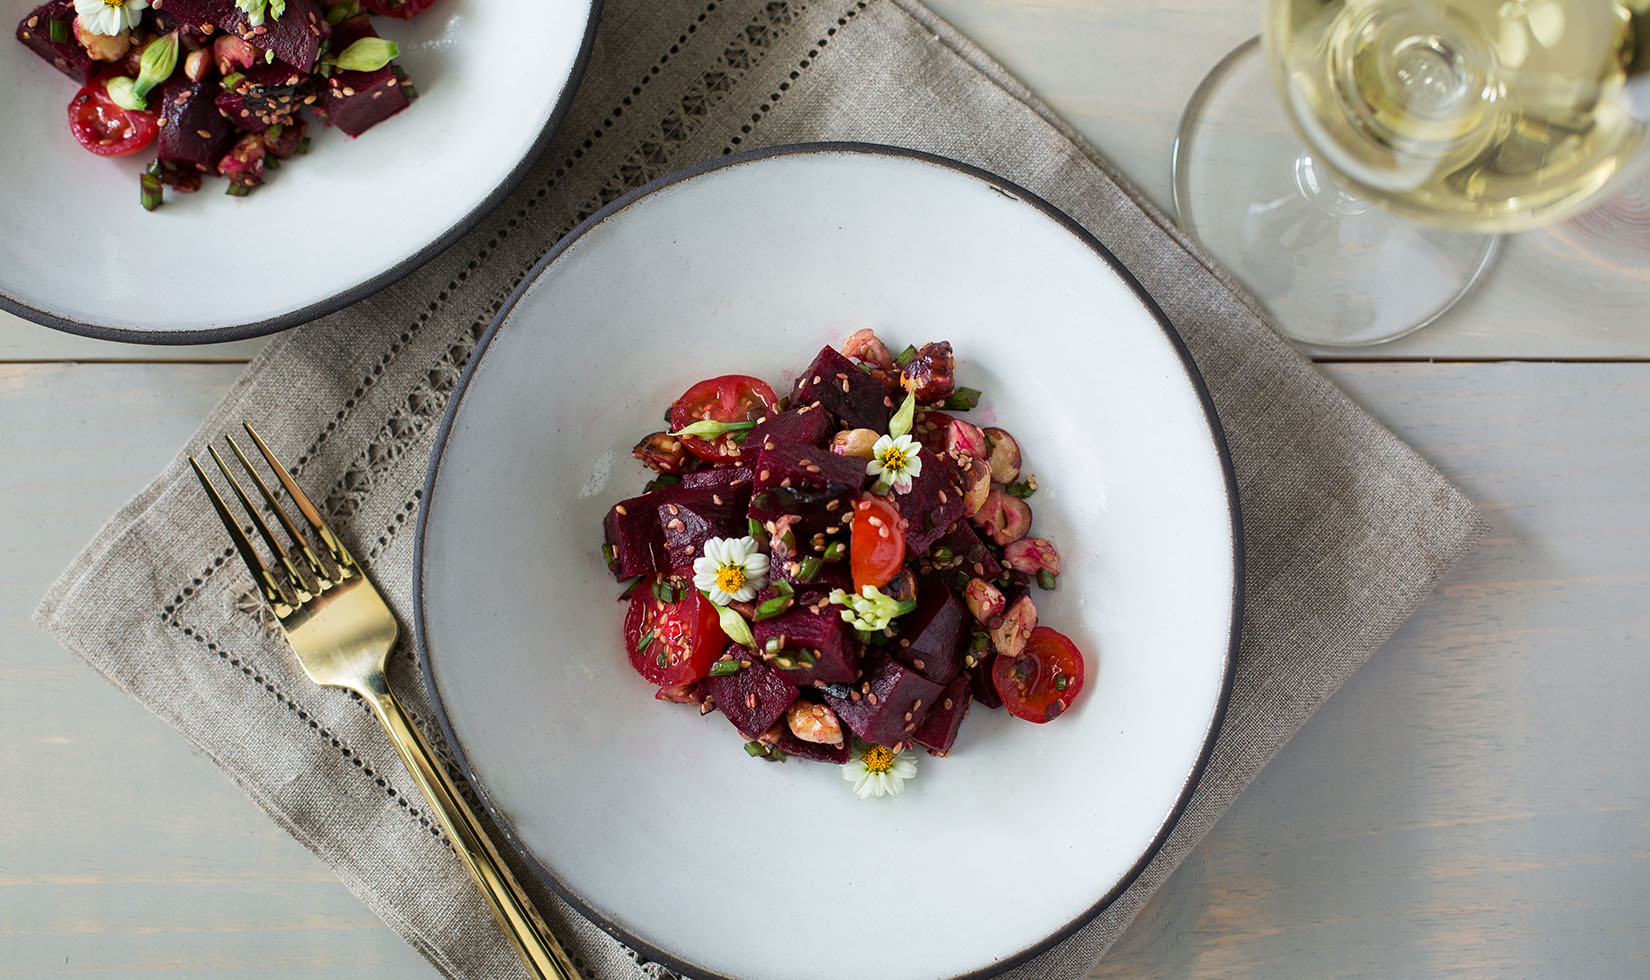 Vegetarian Poke Salad Recipe ideas with Beets and Tomatoes